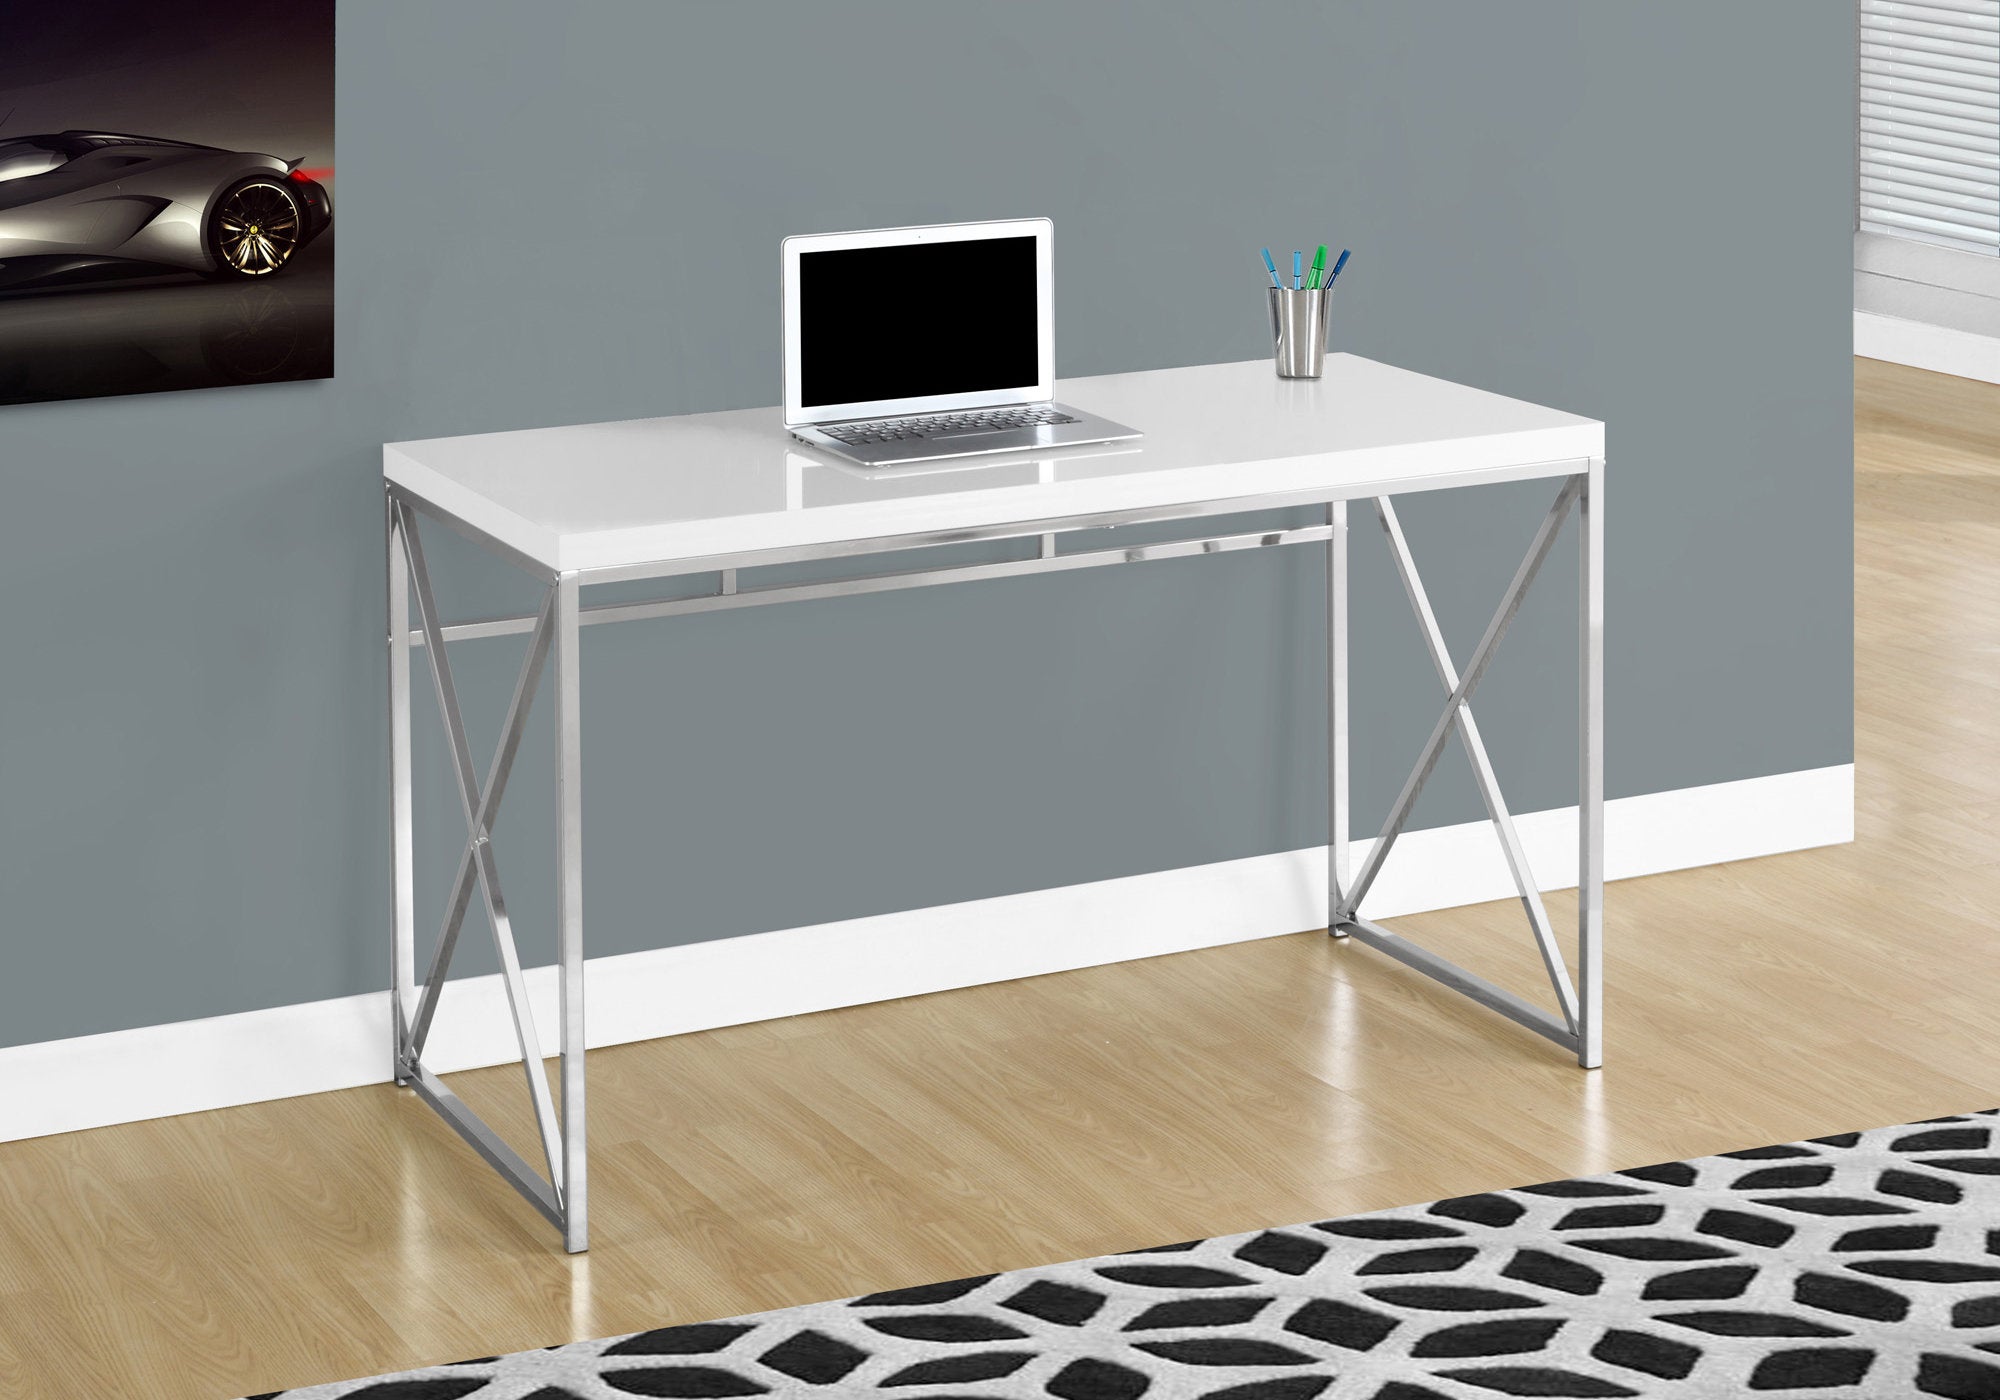 MN-457205    Computer Desk, Home Office, Laptop, Storage Drawers, Metal, Laminate, Glossy White, Chrome, Contemporary, Modern